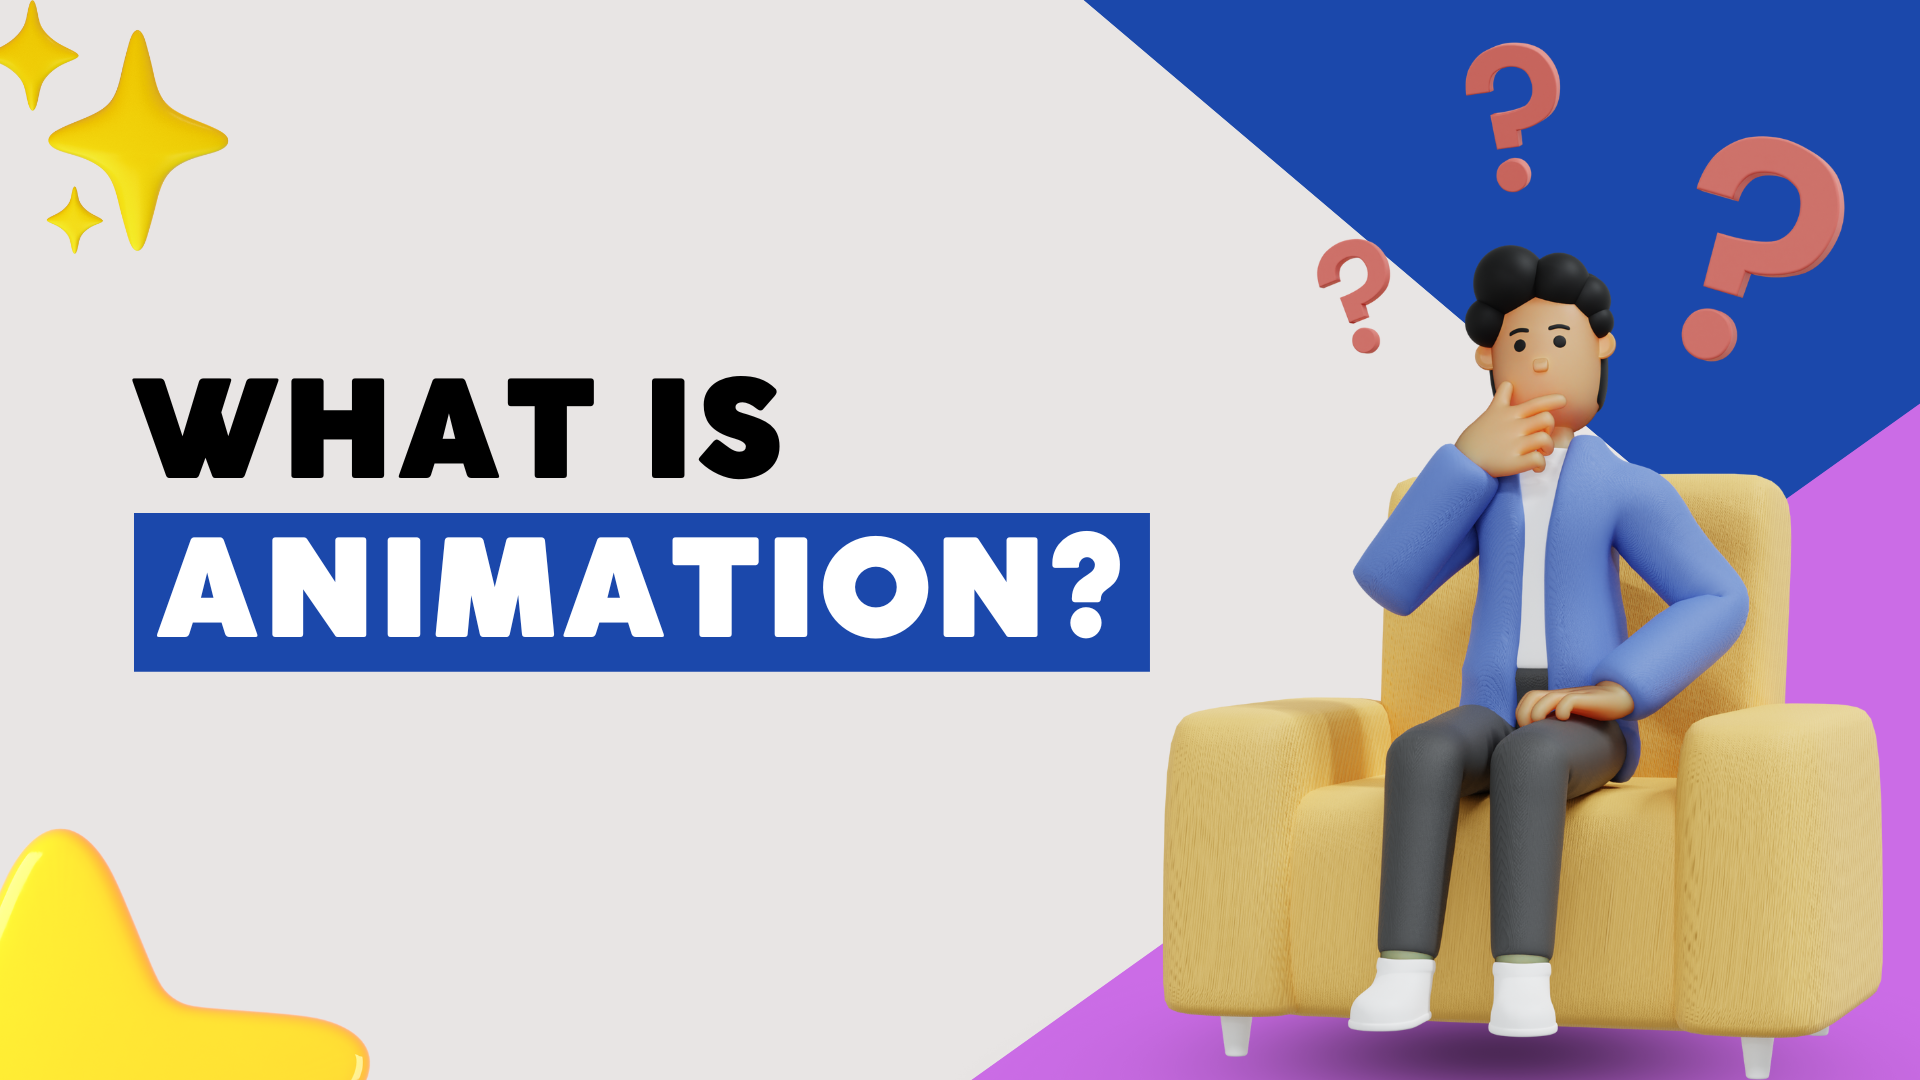 What is Animation?